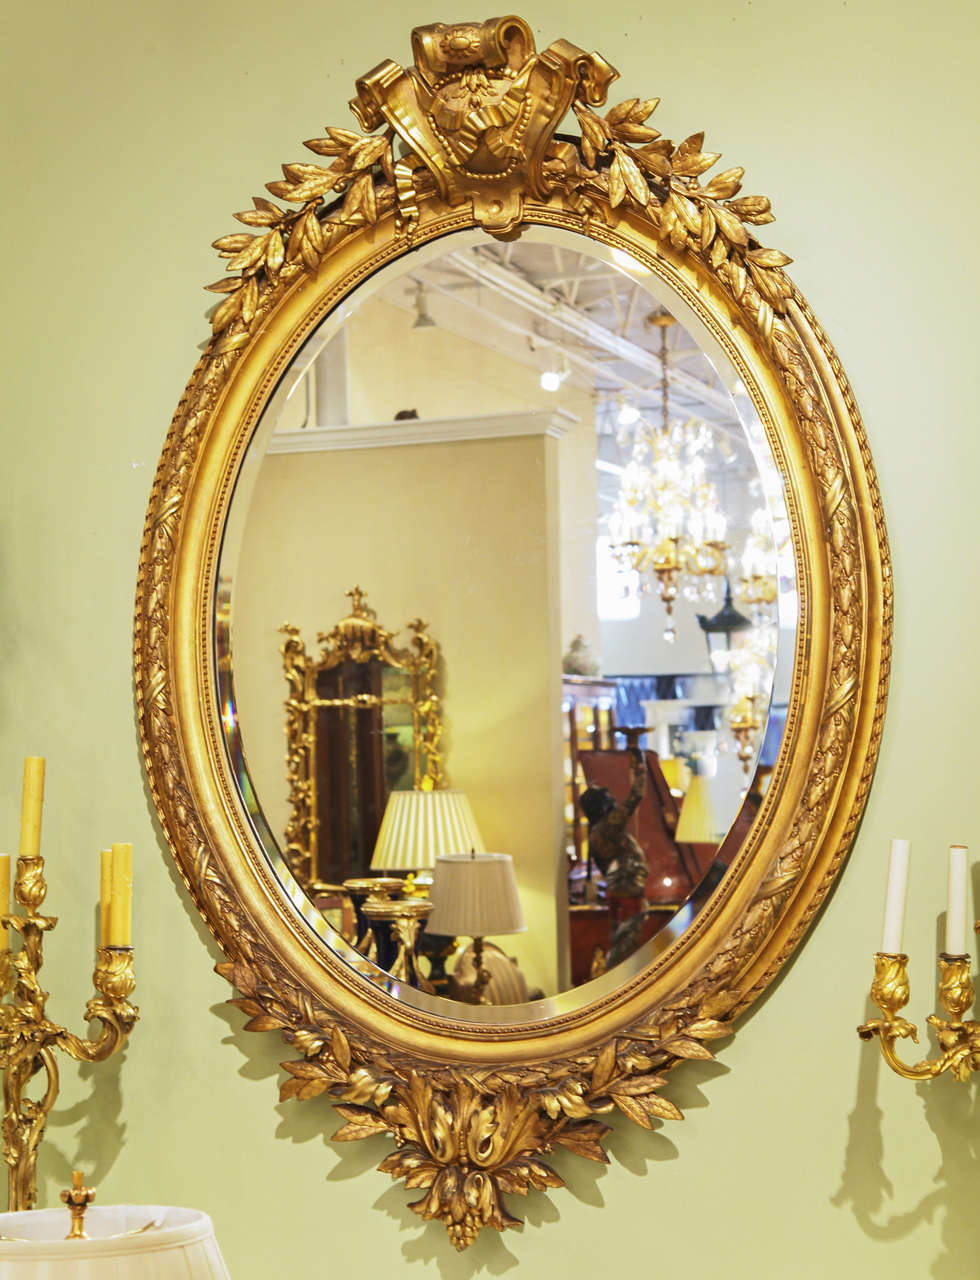 19th c Beautifully carved and gilt oval mirror. Cartouche design at top with beautiful leaf design